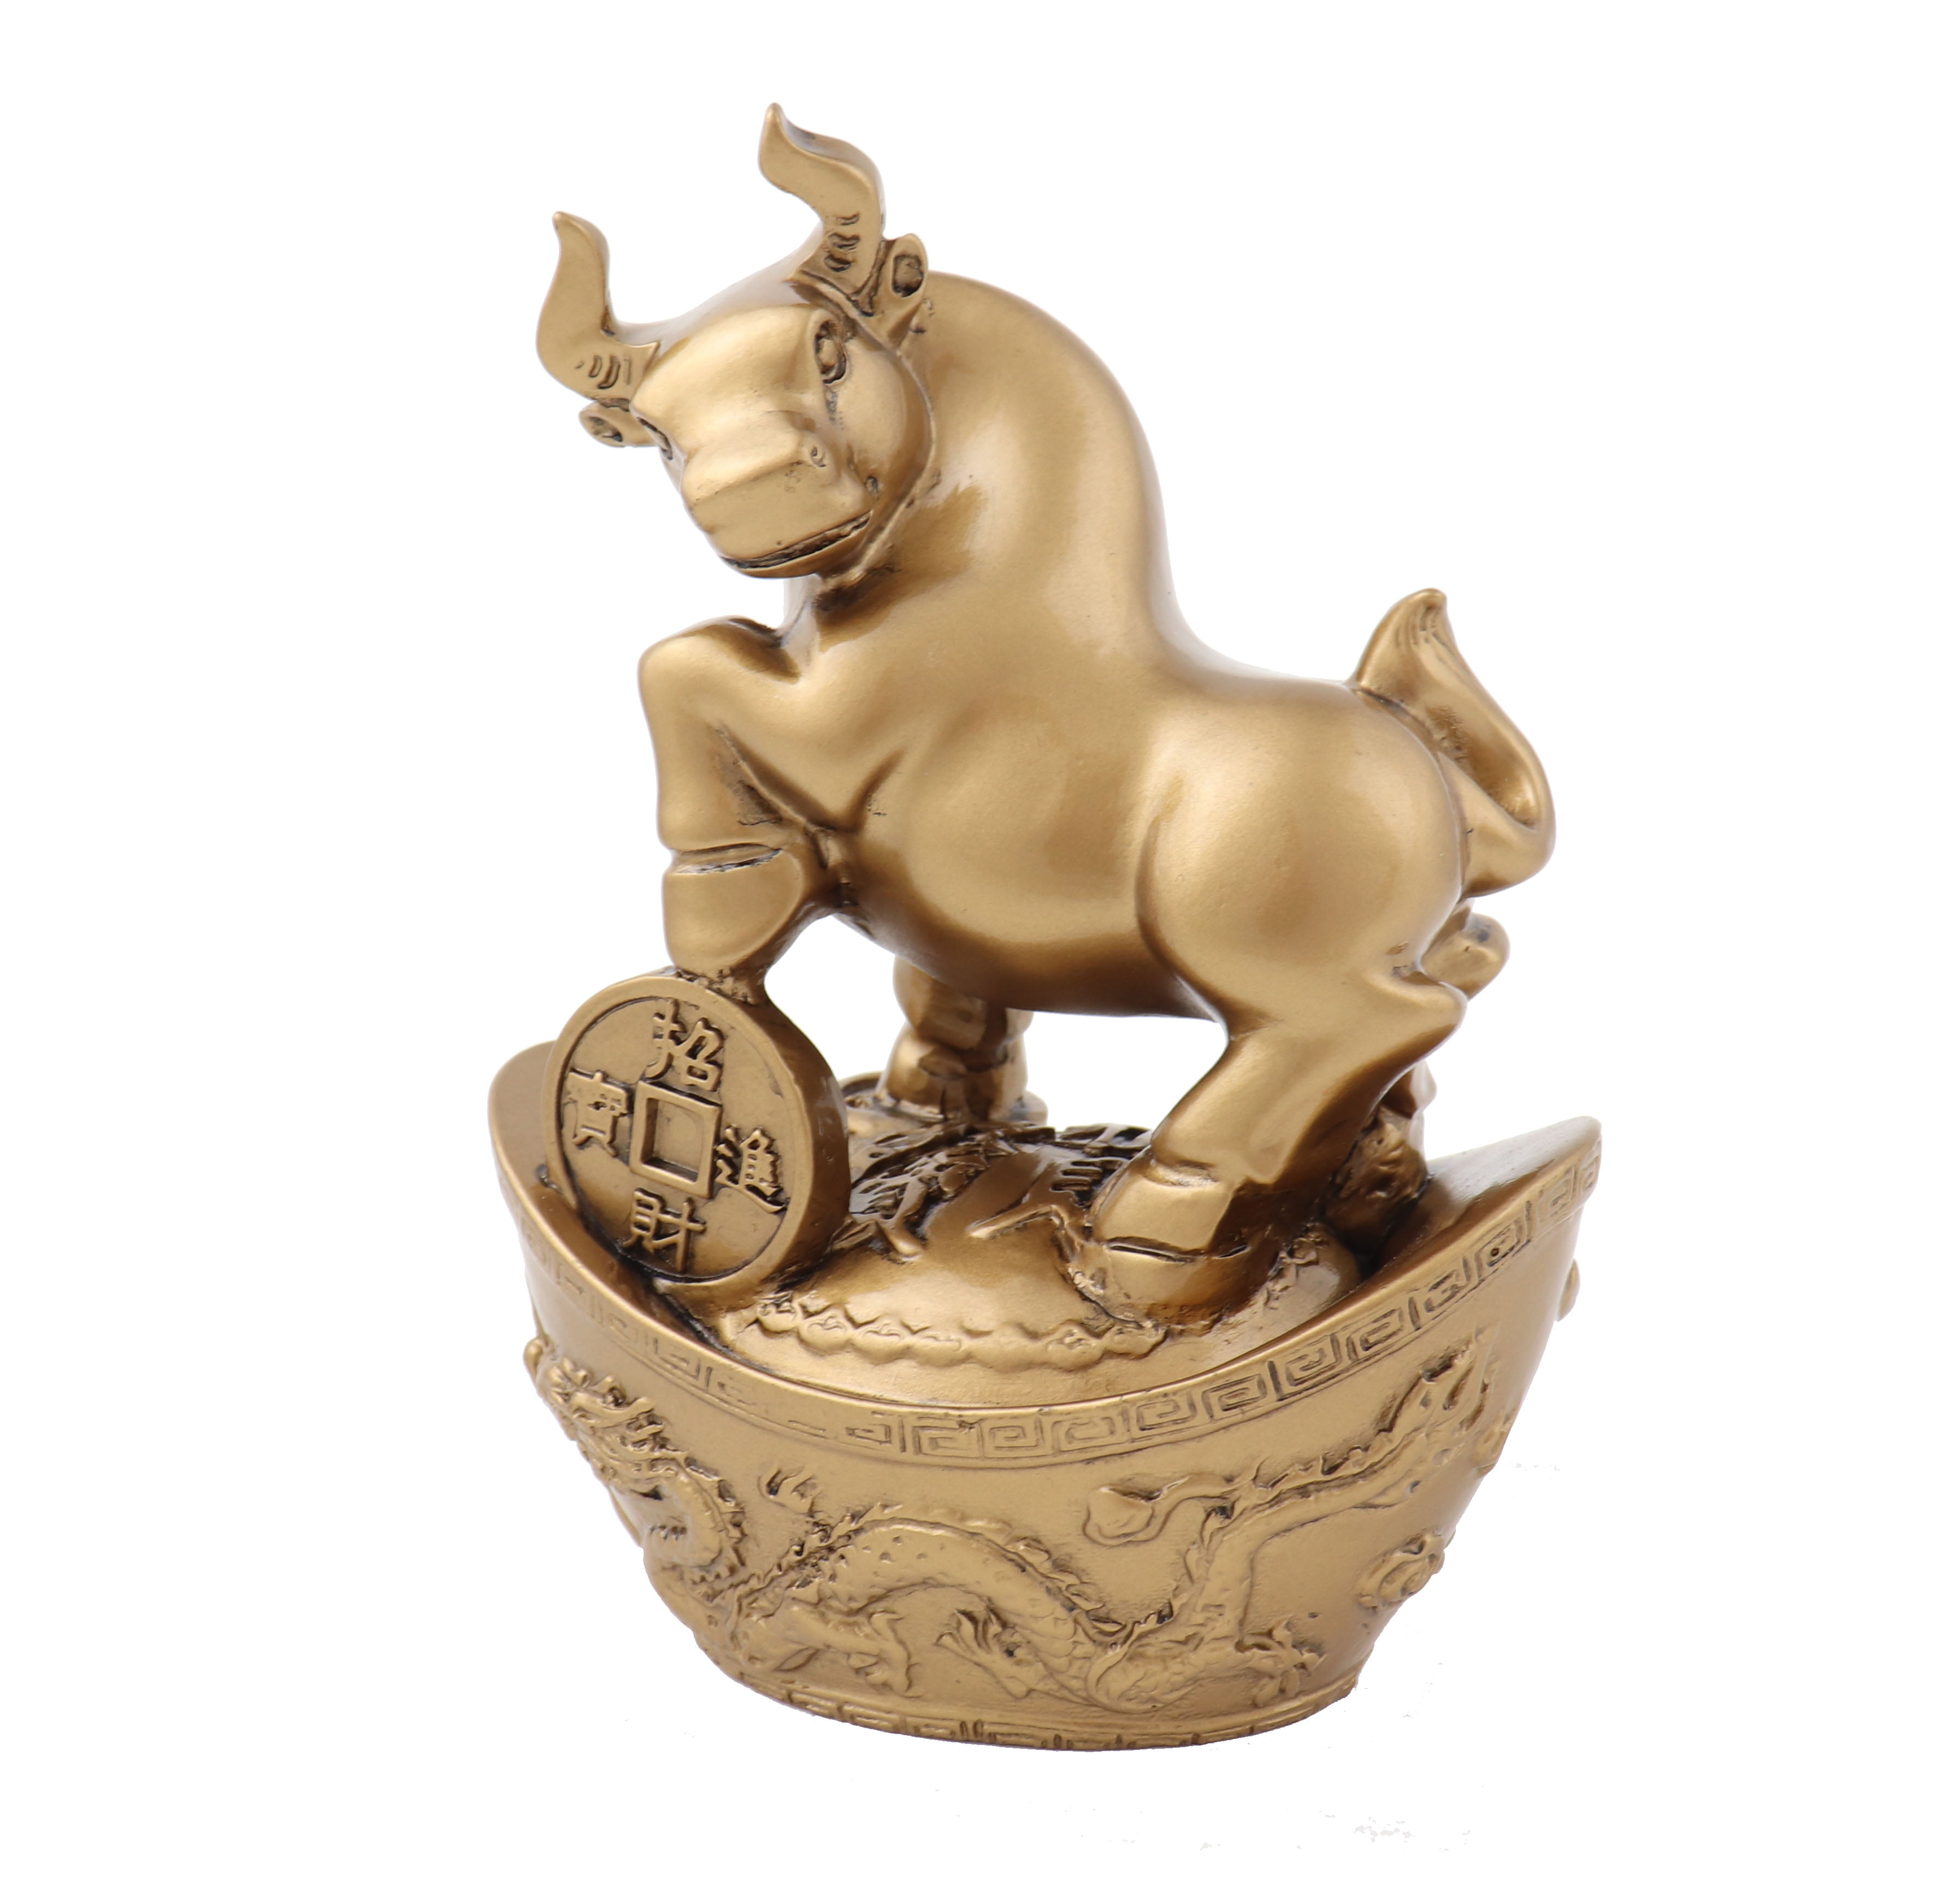 New Year of the Ox Bull Ornament Figurine Miniature Statue Display Home Desk 